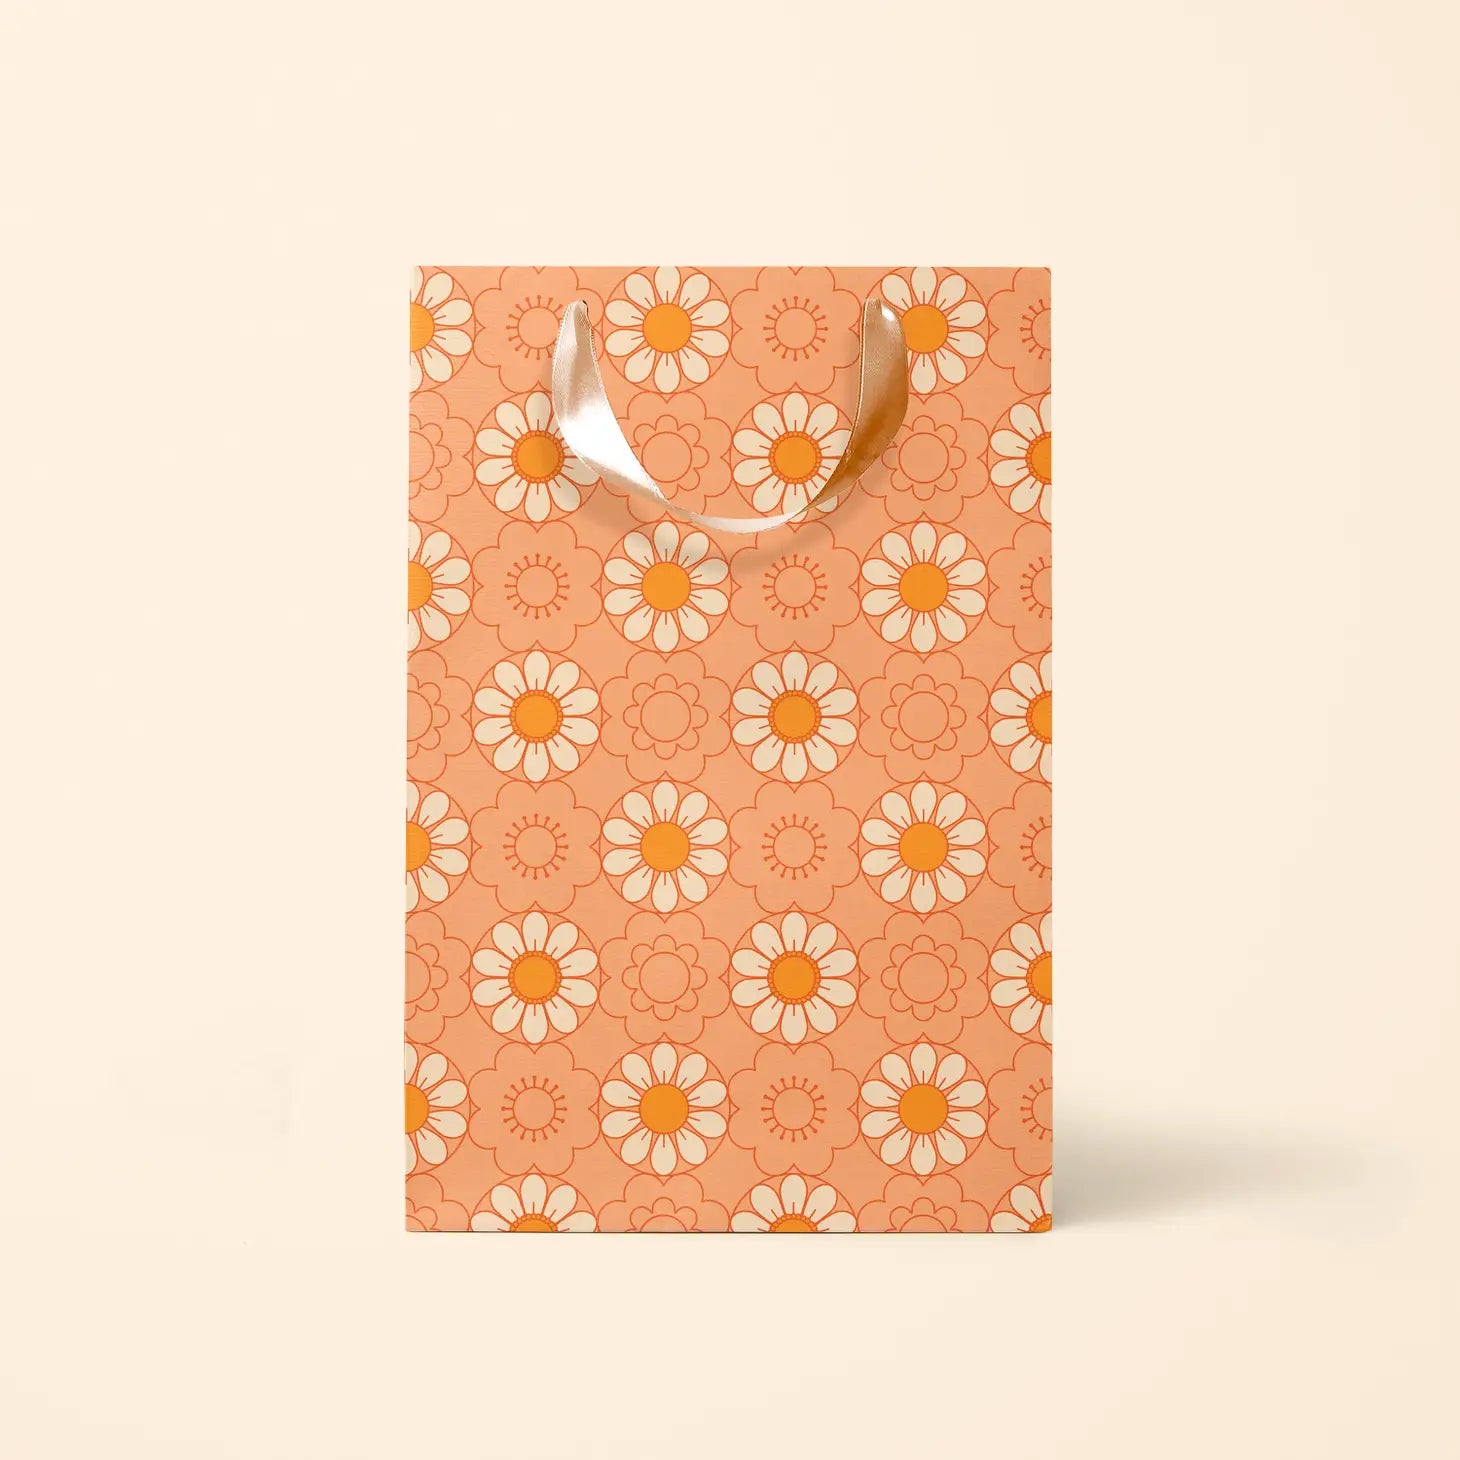 On an ivory background is the medium gift bag with an orange color and an ivory and orange daisy pattern. 